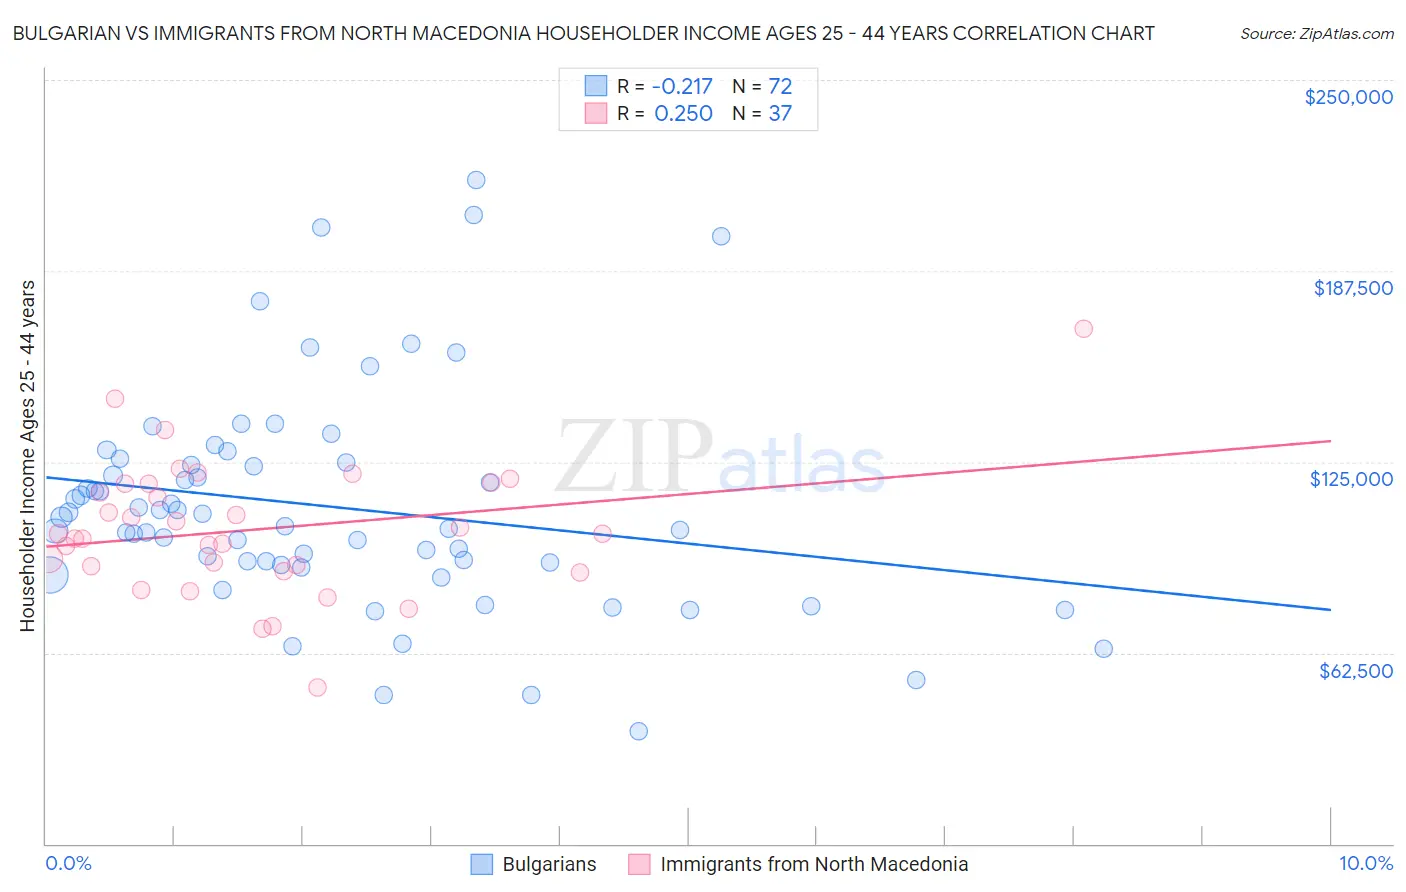 Bulgarian vs Immigrants from North Macedonia Householder Income Ages 25 - 44 years